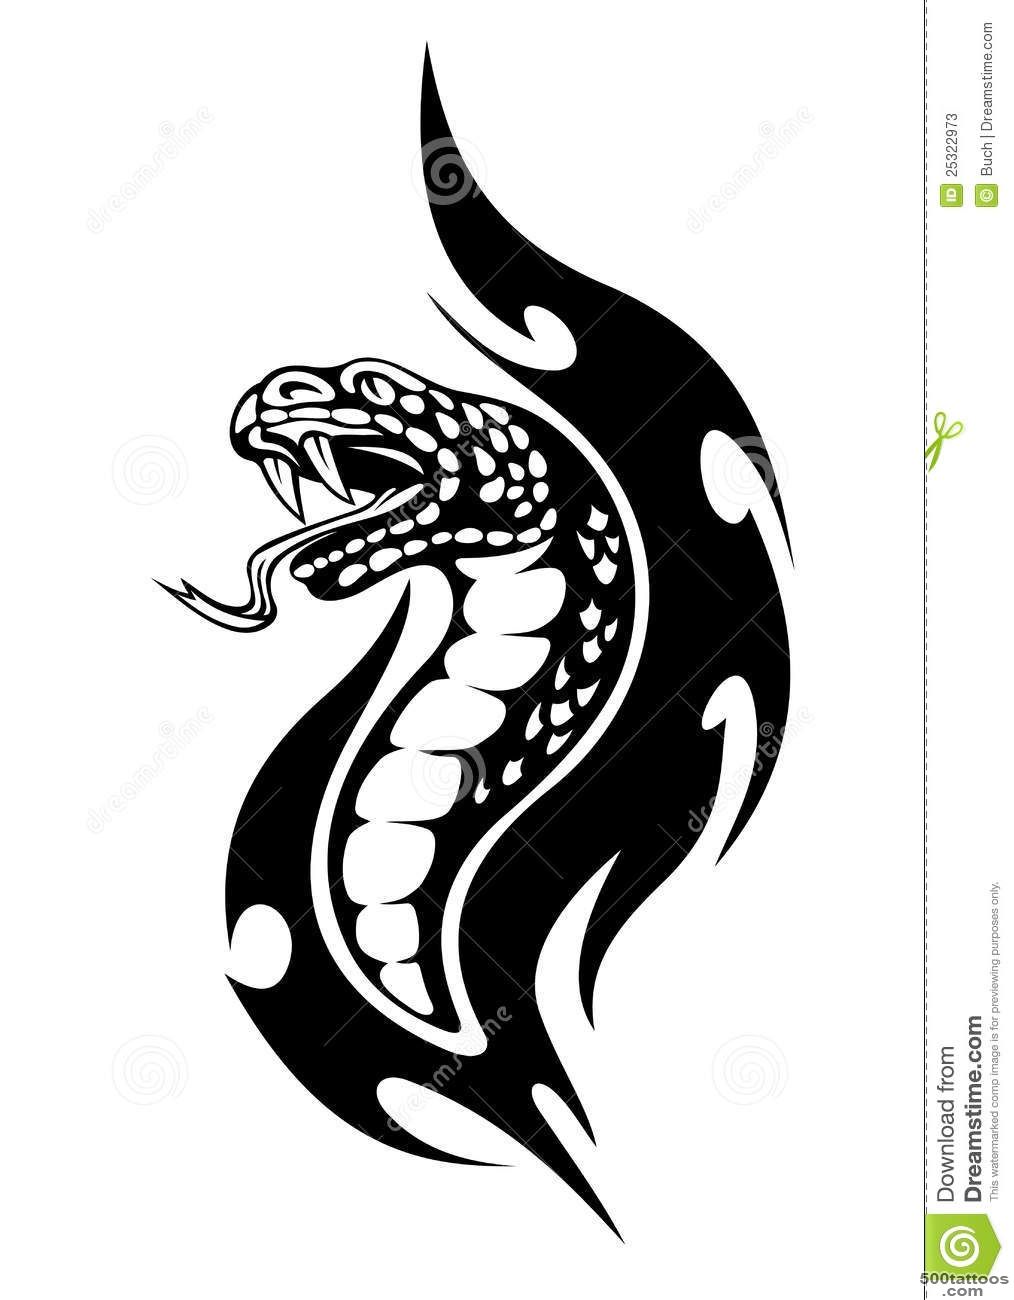 Pin Viper Tattoo With Black Flames Vector Illustration on Pinterest_31